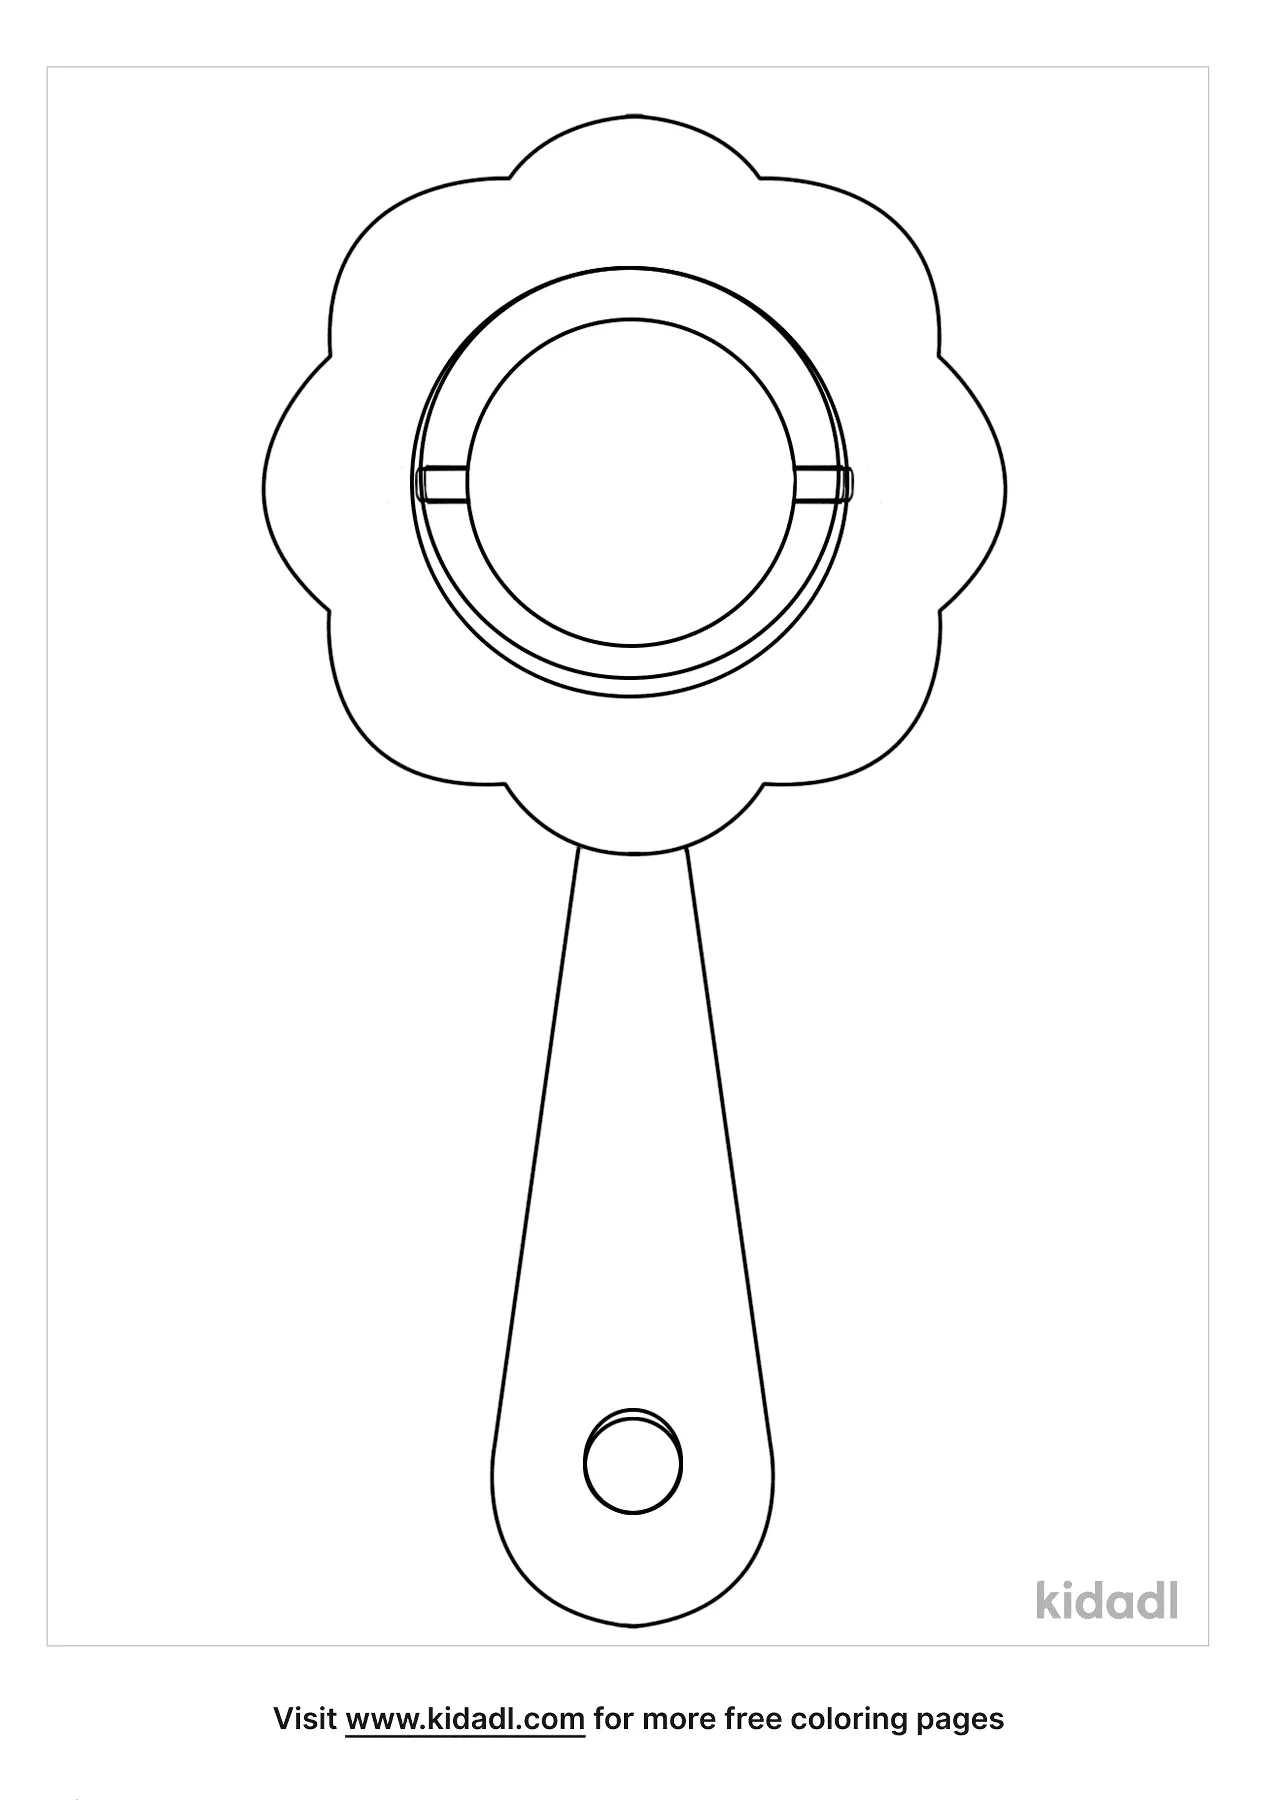 Baby Rattle Coloring Pages Free Toys Coloring Pages Kidadl